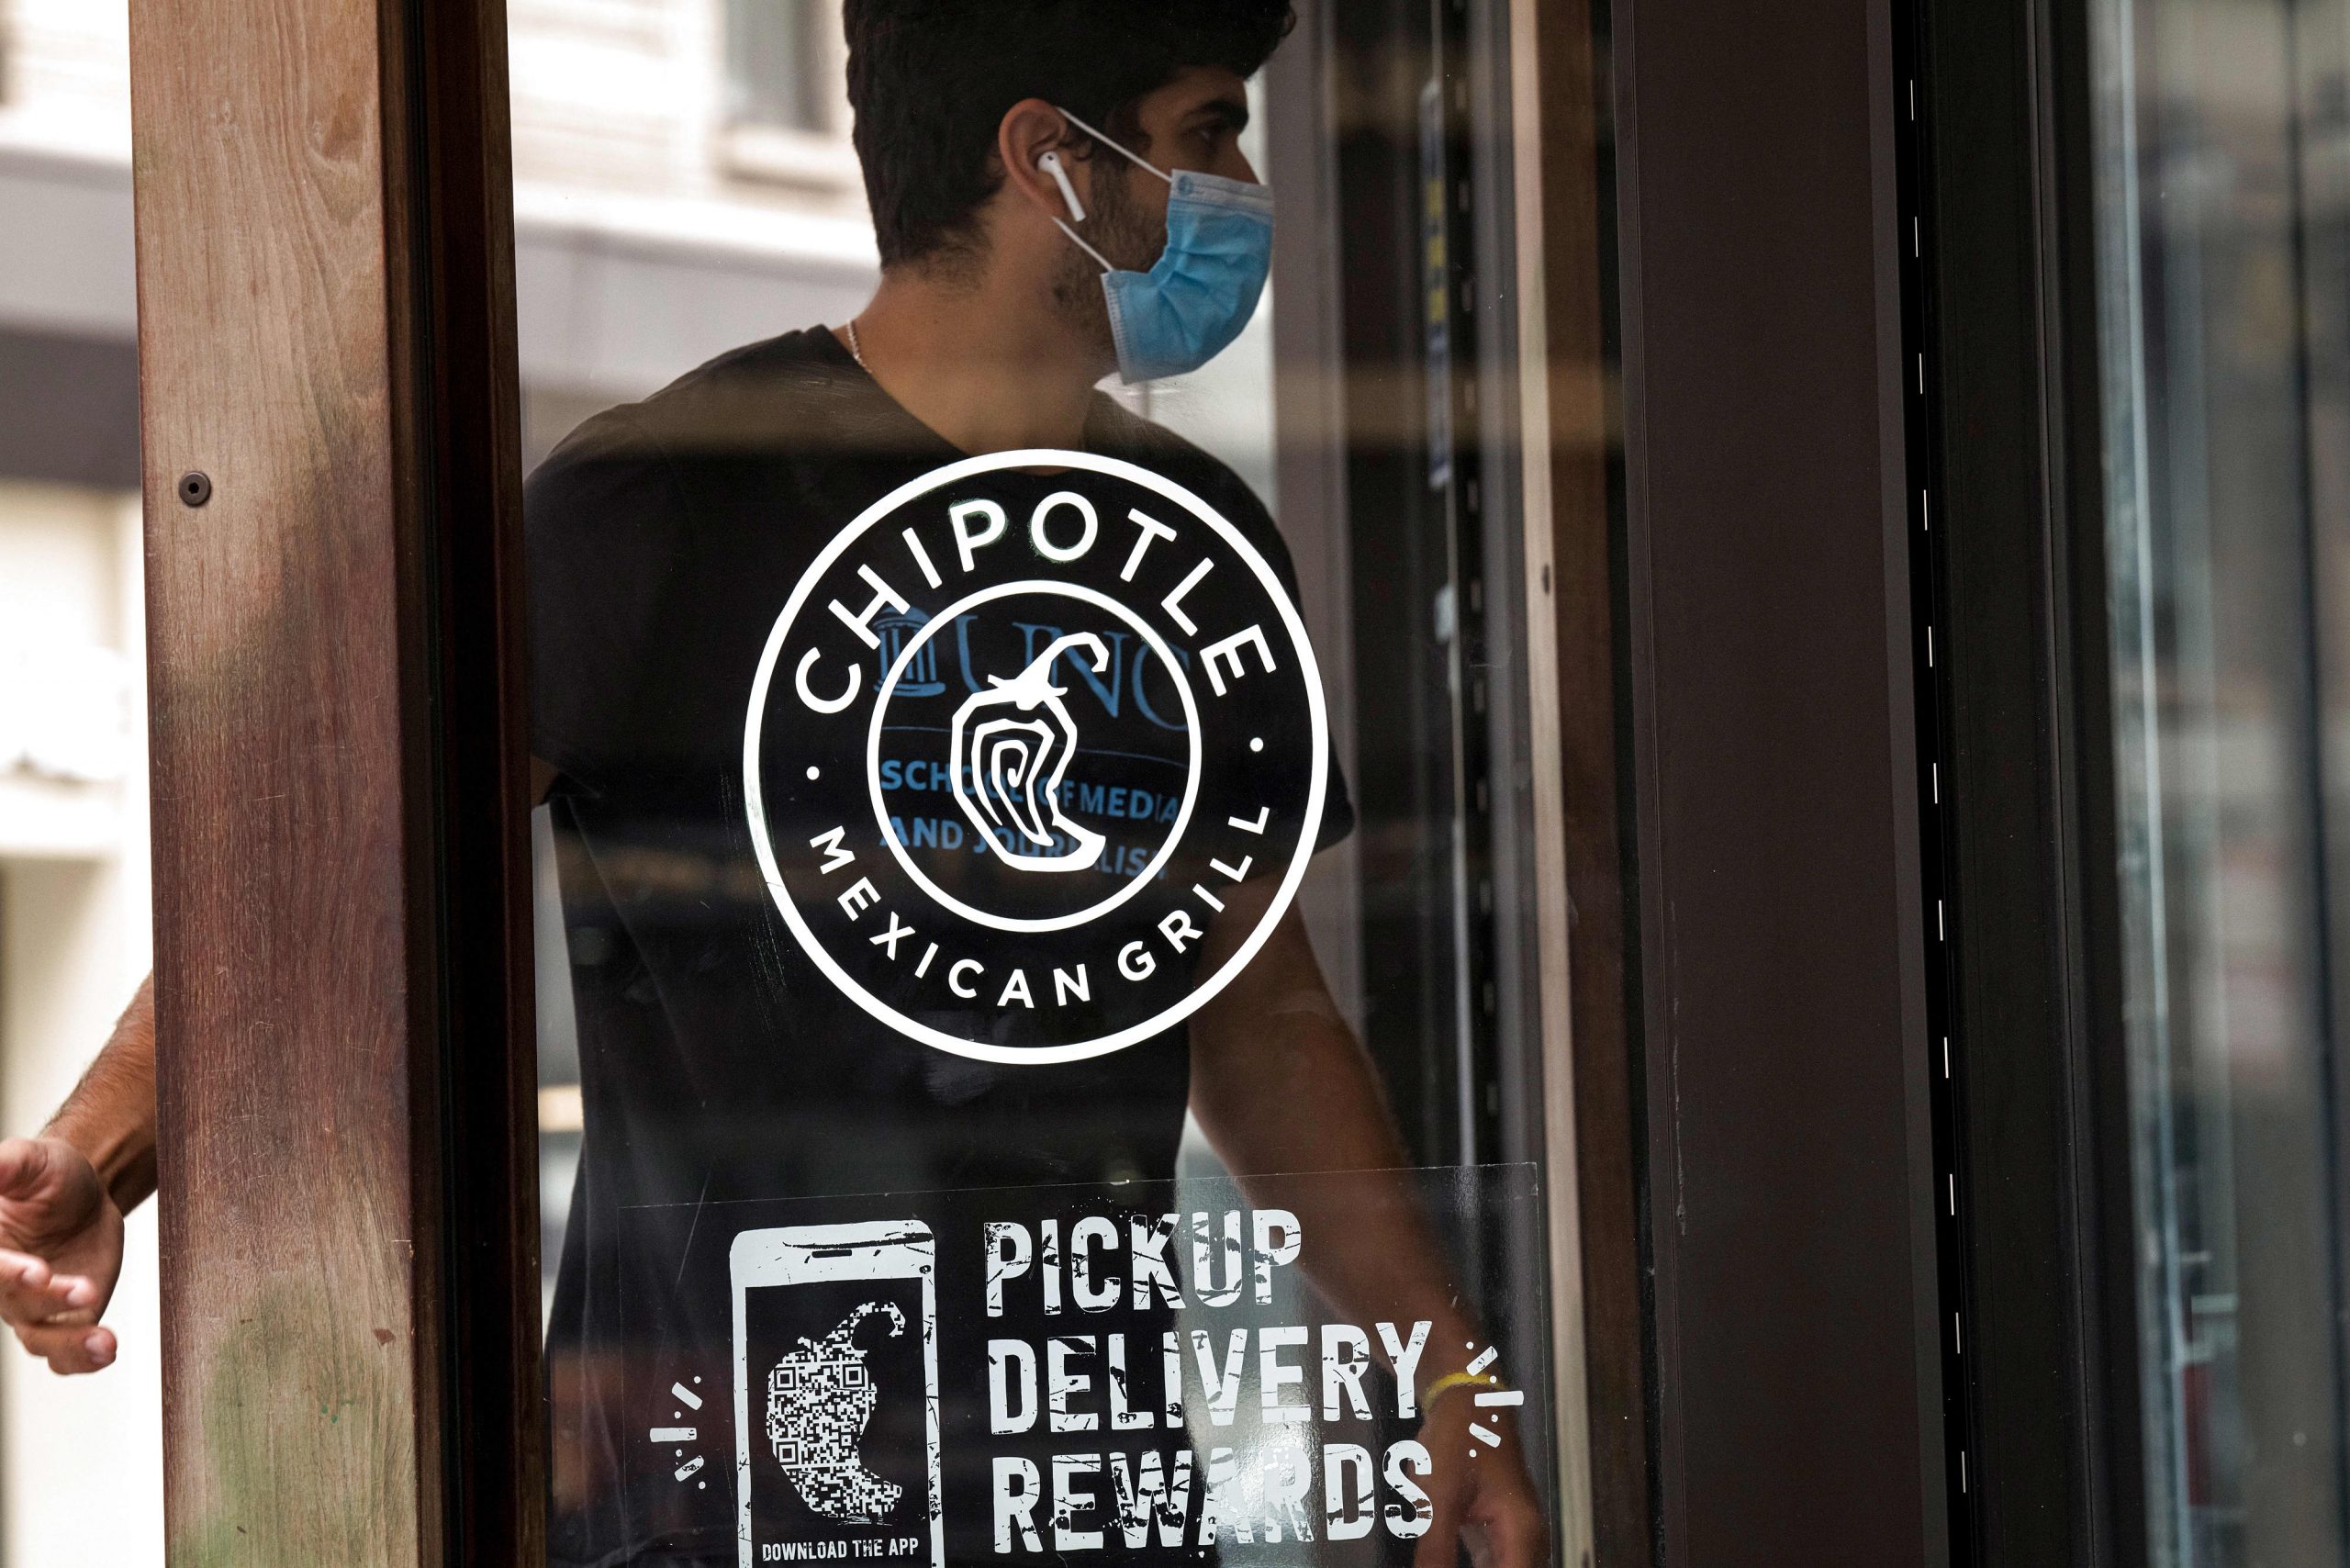 Chipotle’s digital gross sales stay sturdy as eating rooms reopen: CFO